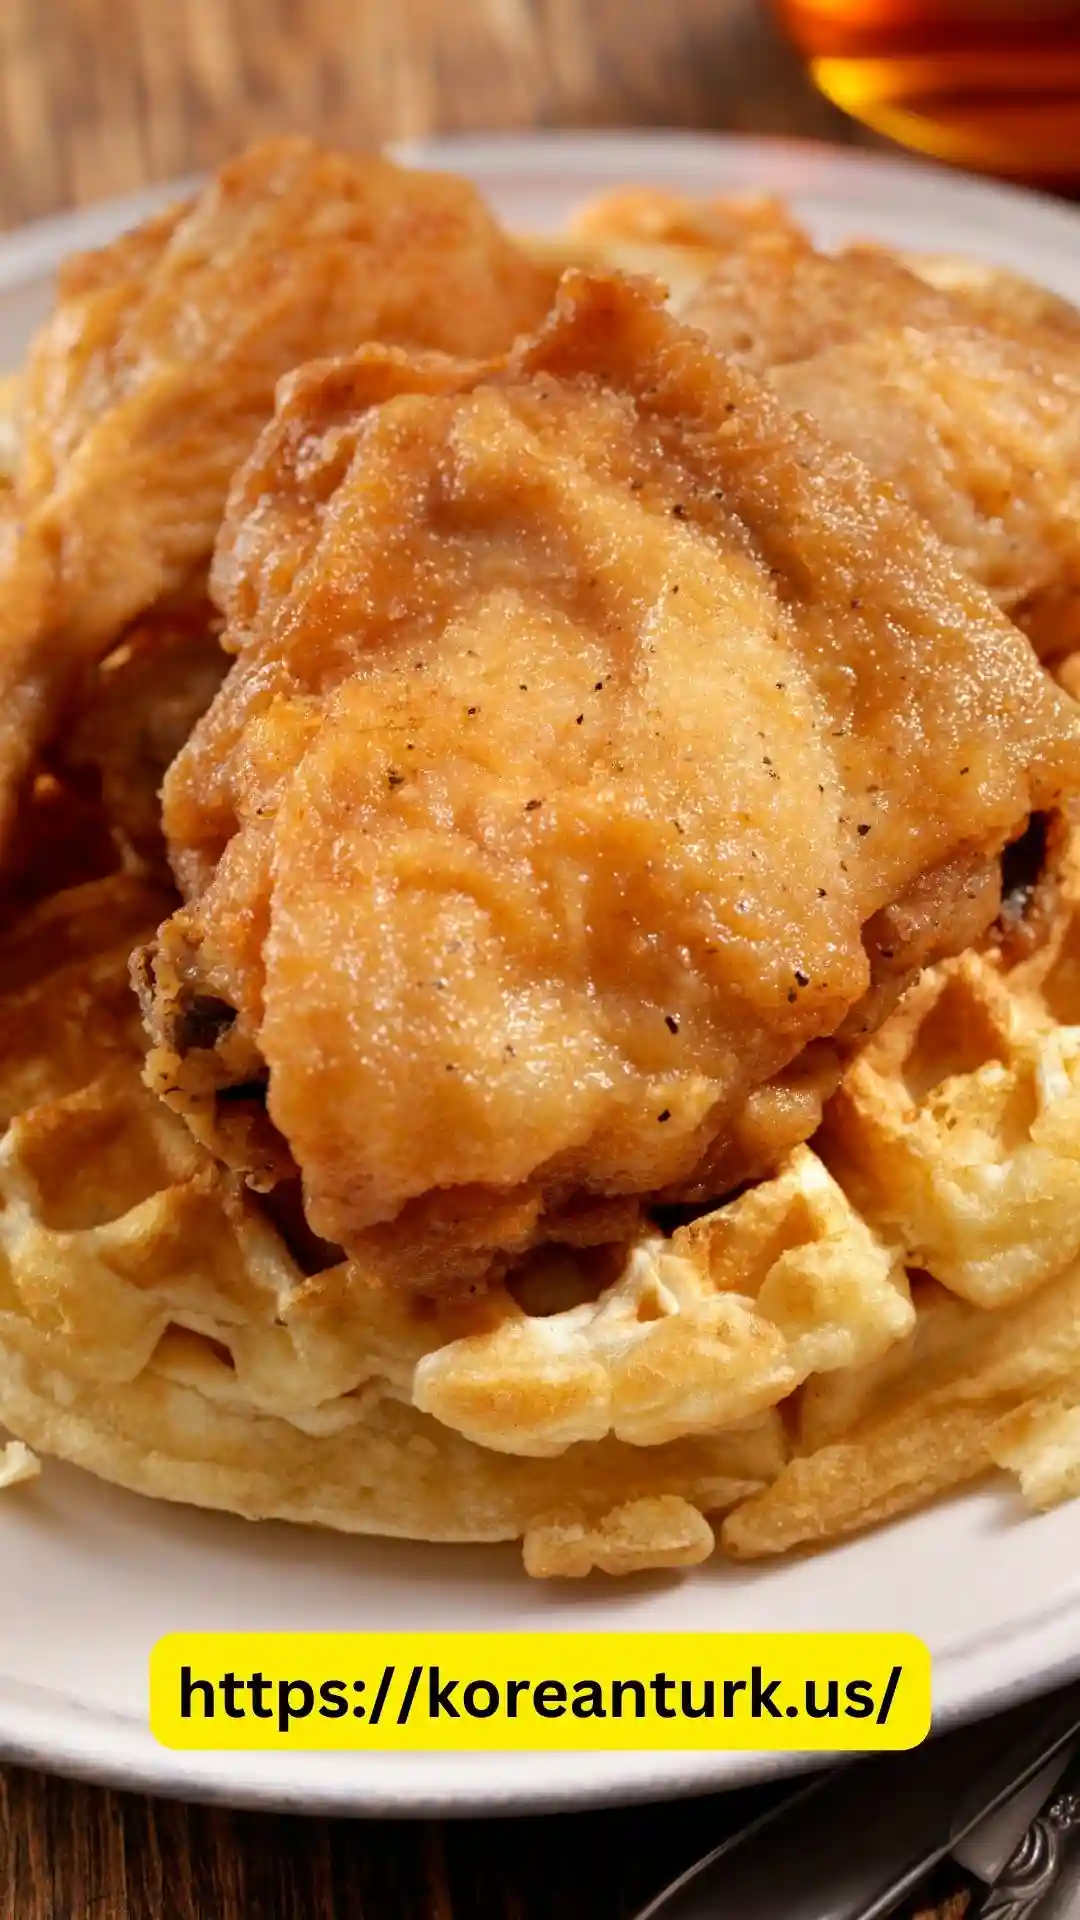 Spicy Fried Chicken and Waffles Recipe